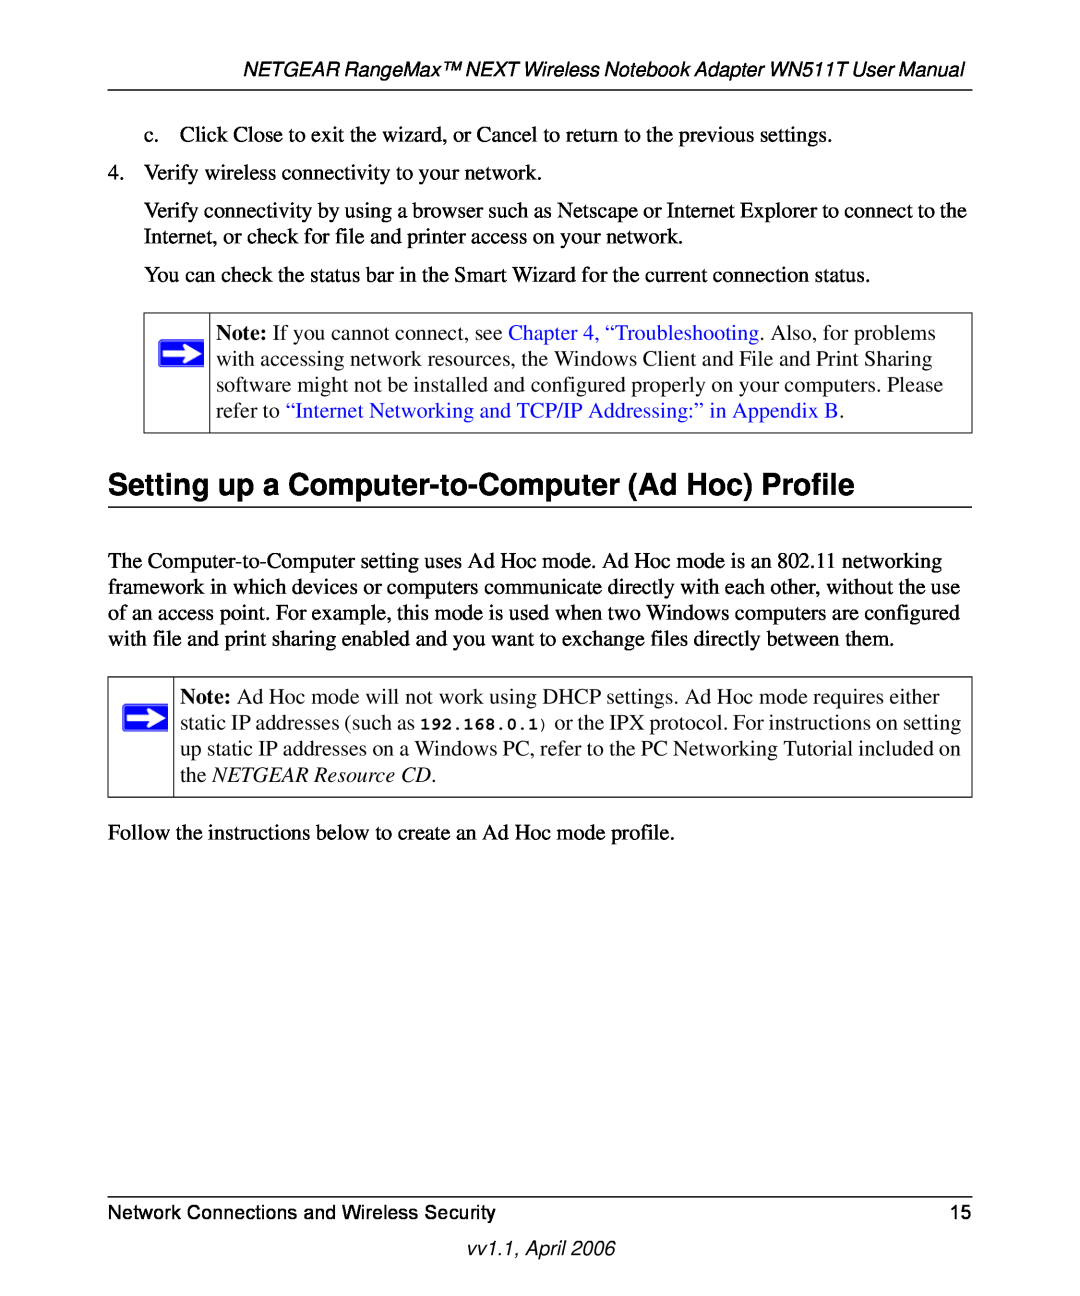 NETGEAR WN511T user manual Setting up a Computer-to-Computer Ad Hoc Profile 